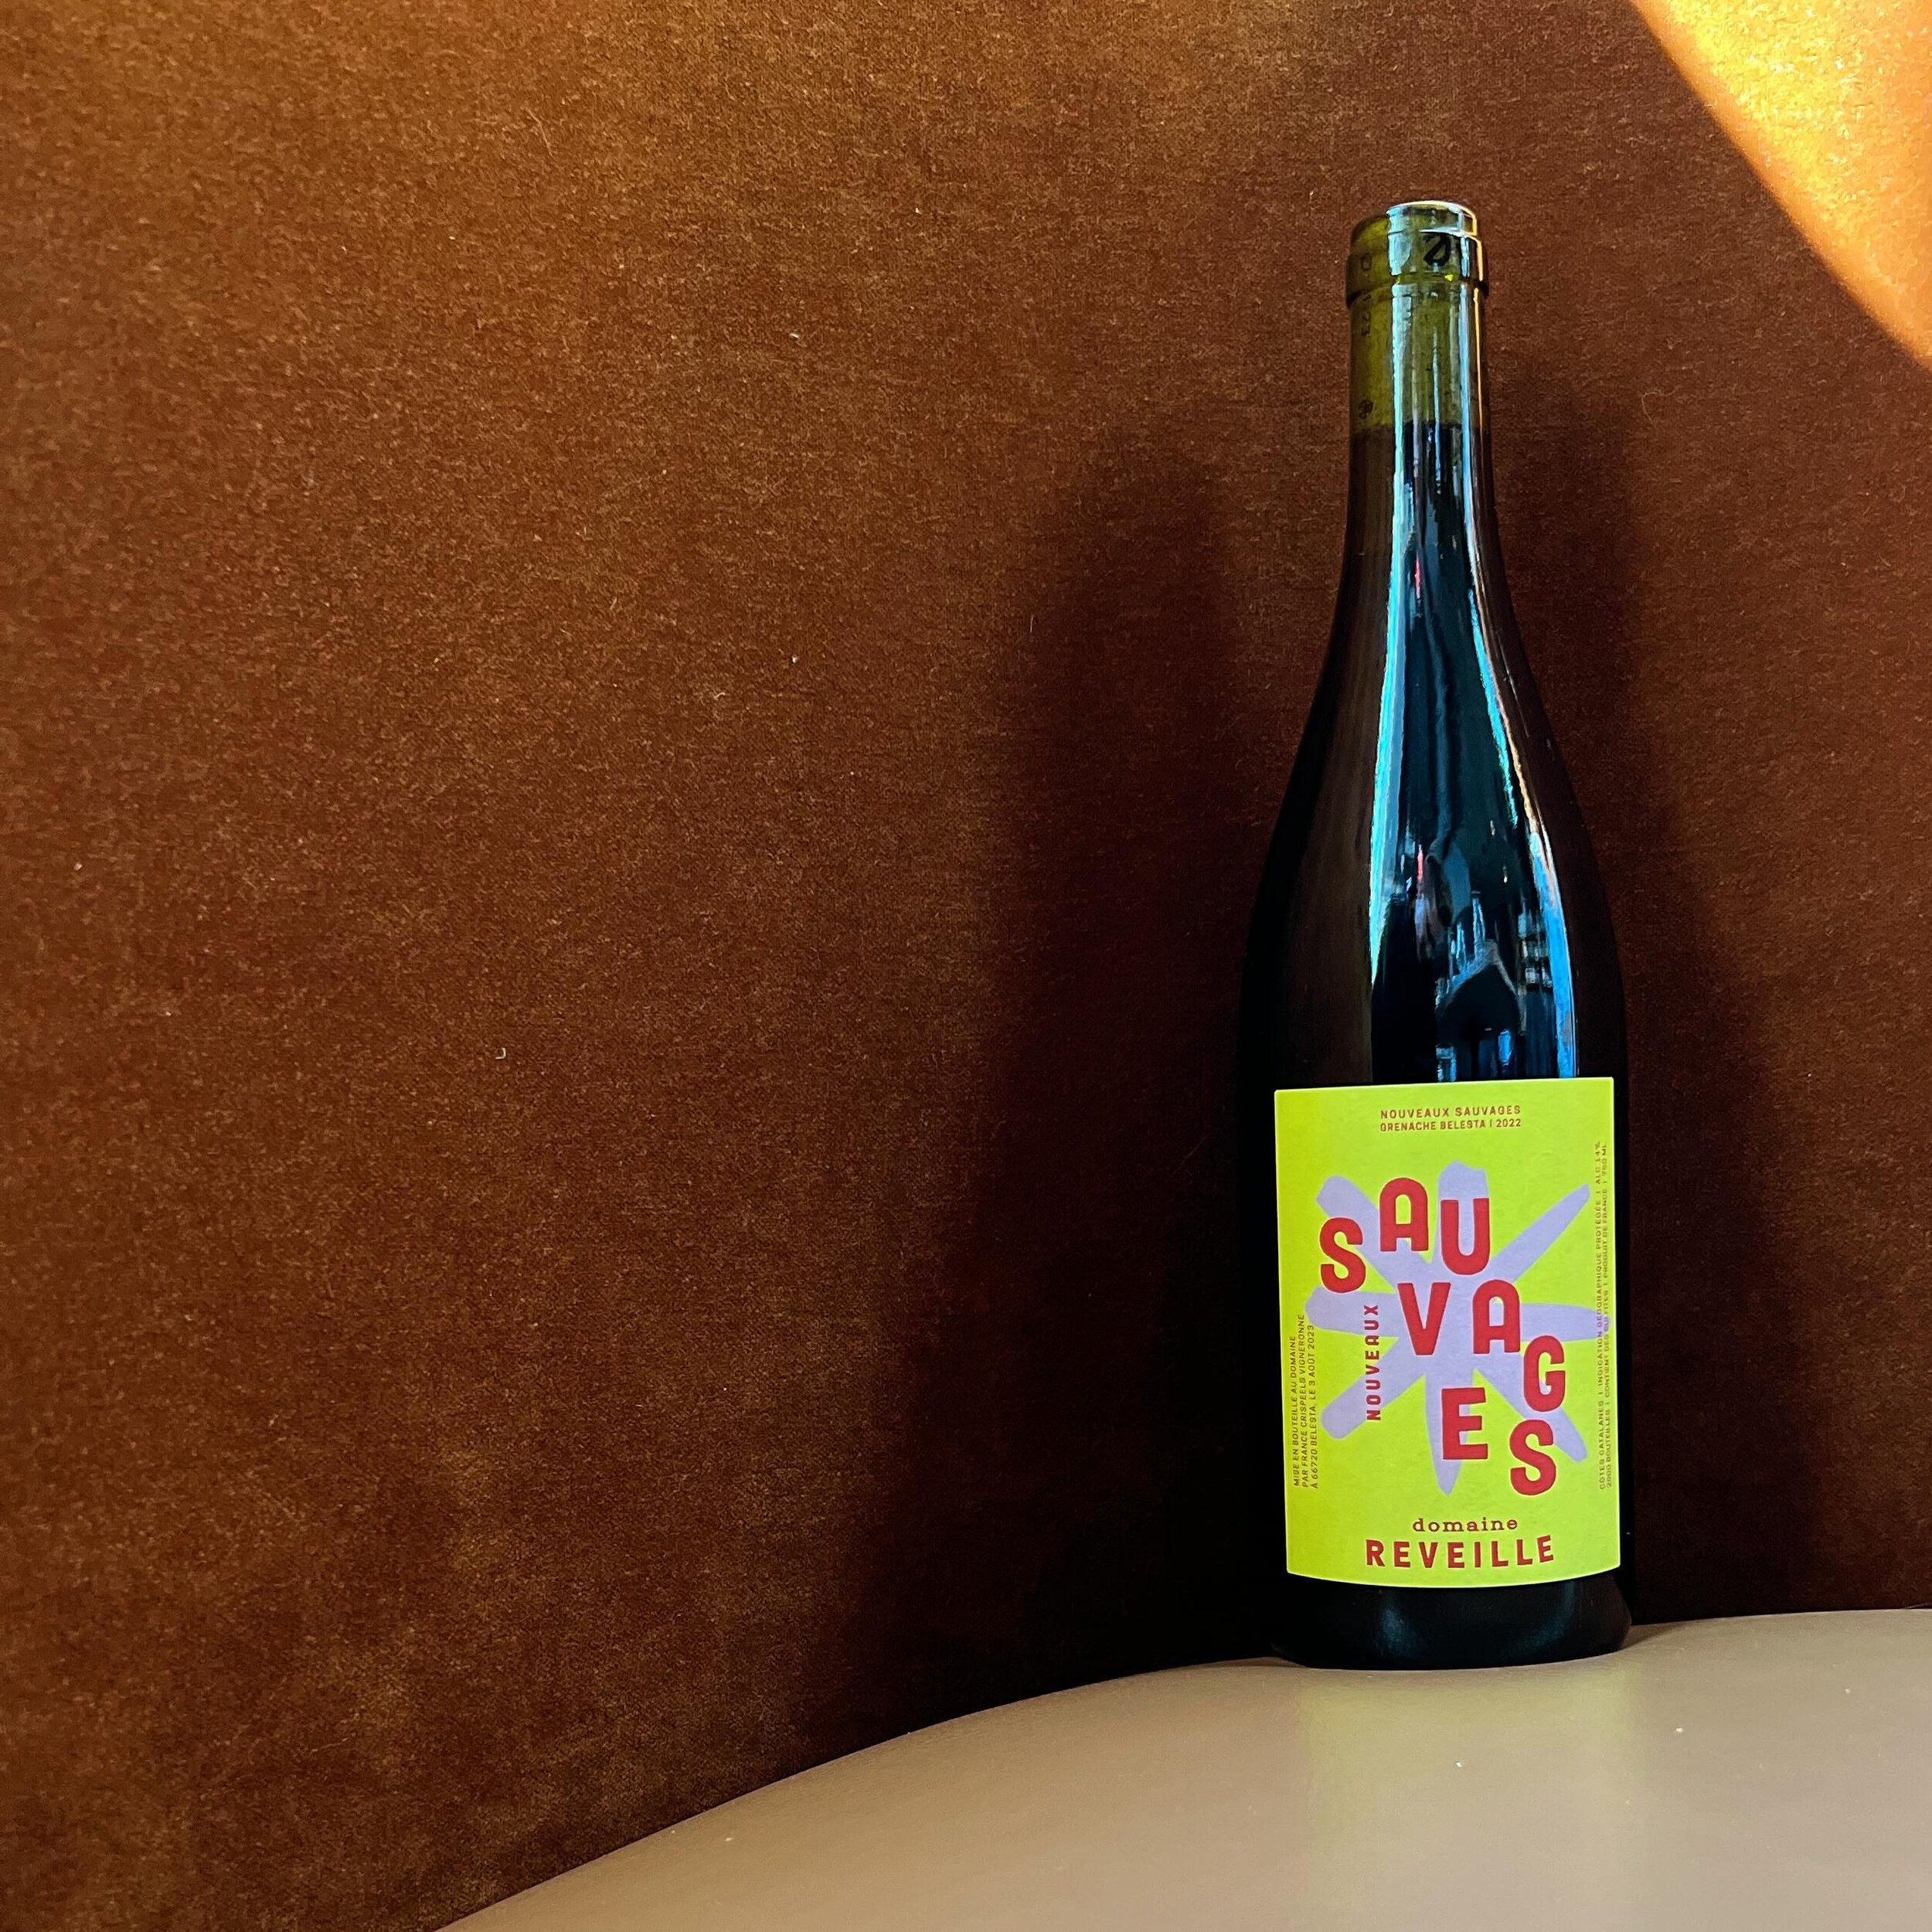 .
Half carbonic + half short fermentation = #thejuiceisloose 

Come drink this killer Grenache from winemaker @francecrispeels of @vignoble.reveille in the Languedoc - grippy notes of red berried fruits &amp; stone-cold vibrancy - a total #crushshow 